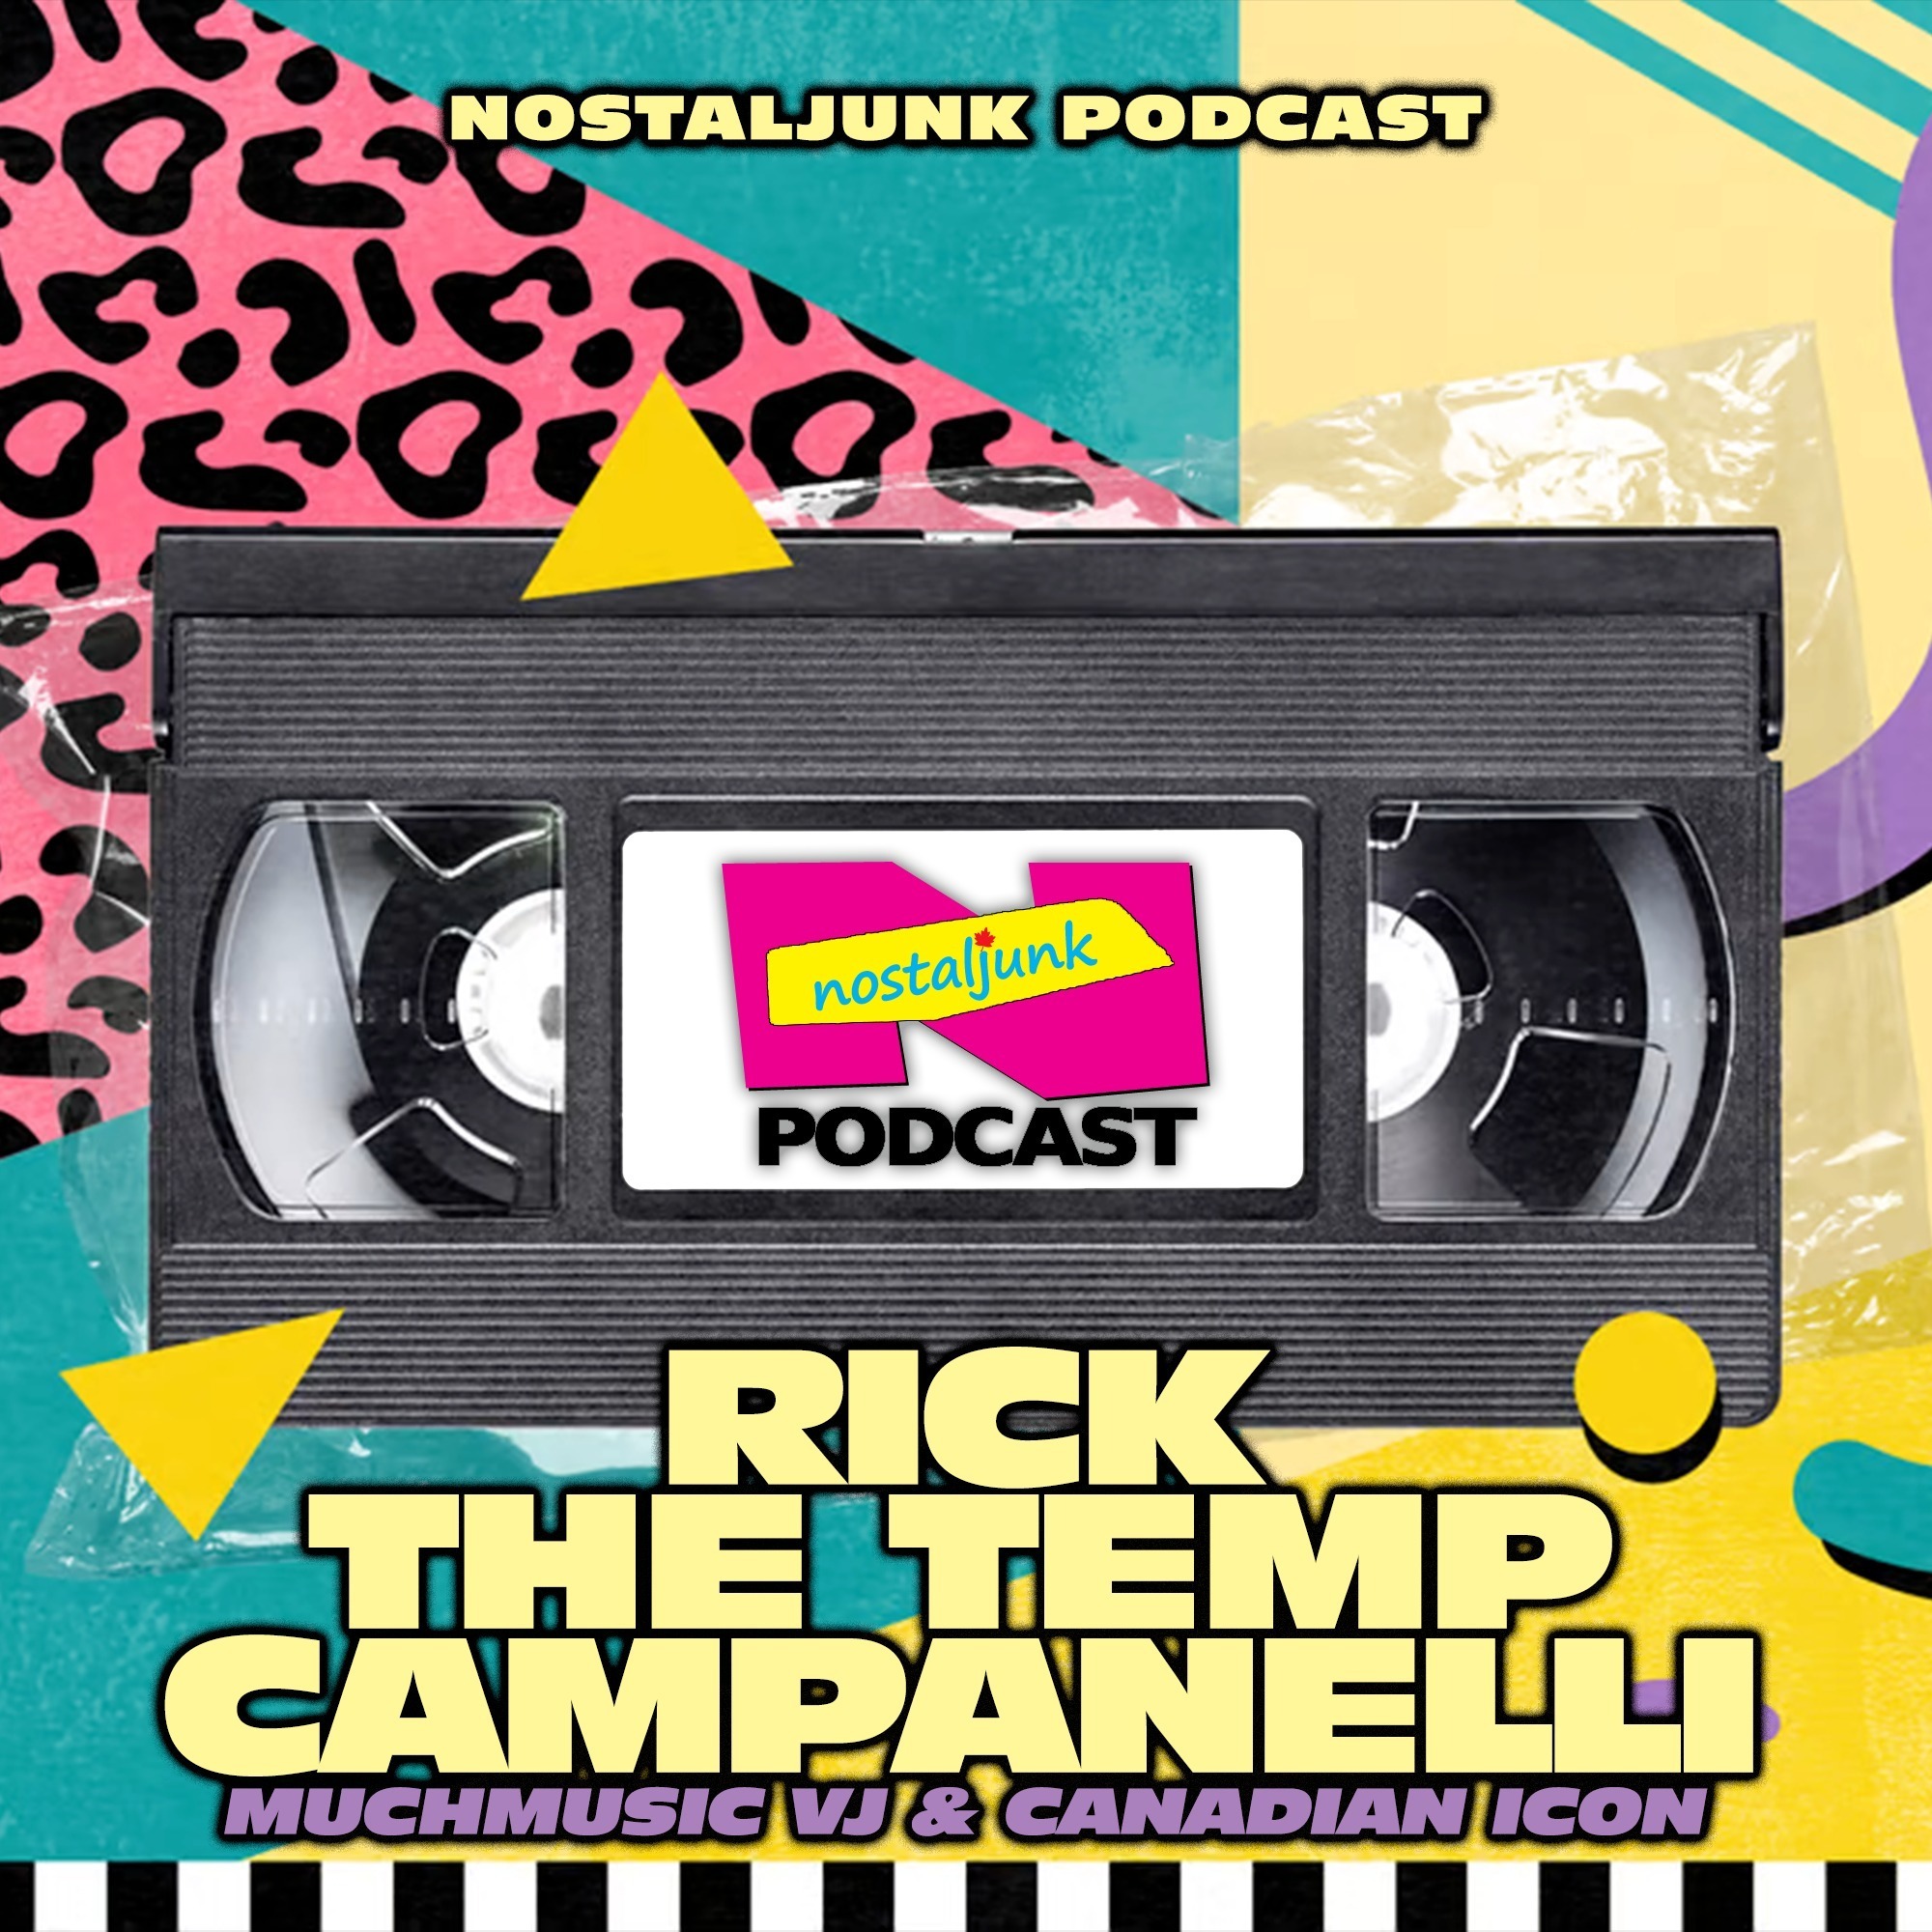 Interview with RICK THE TEMP CAMPANELLI | 90s MuchMusic Image